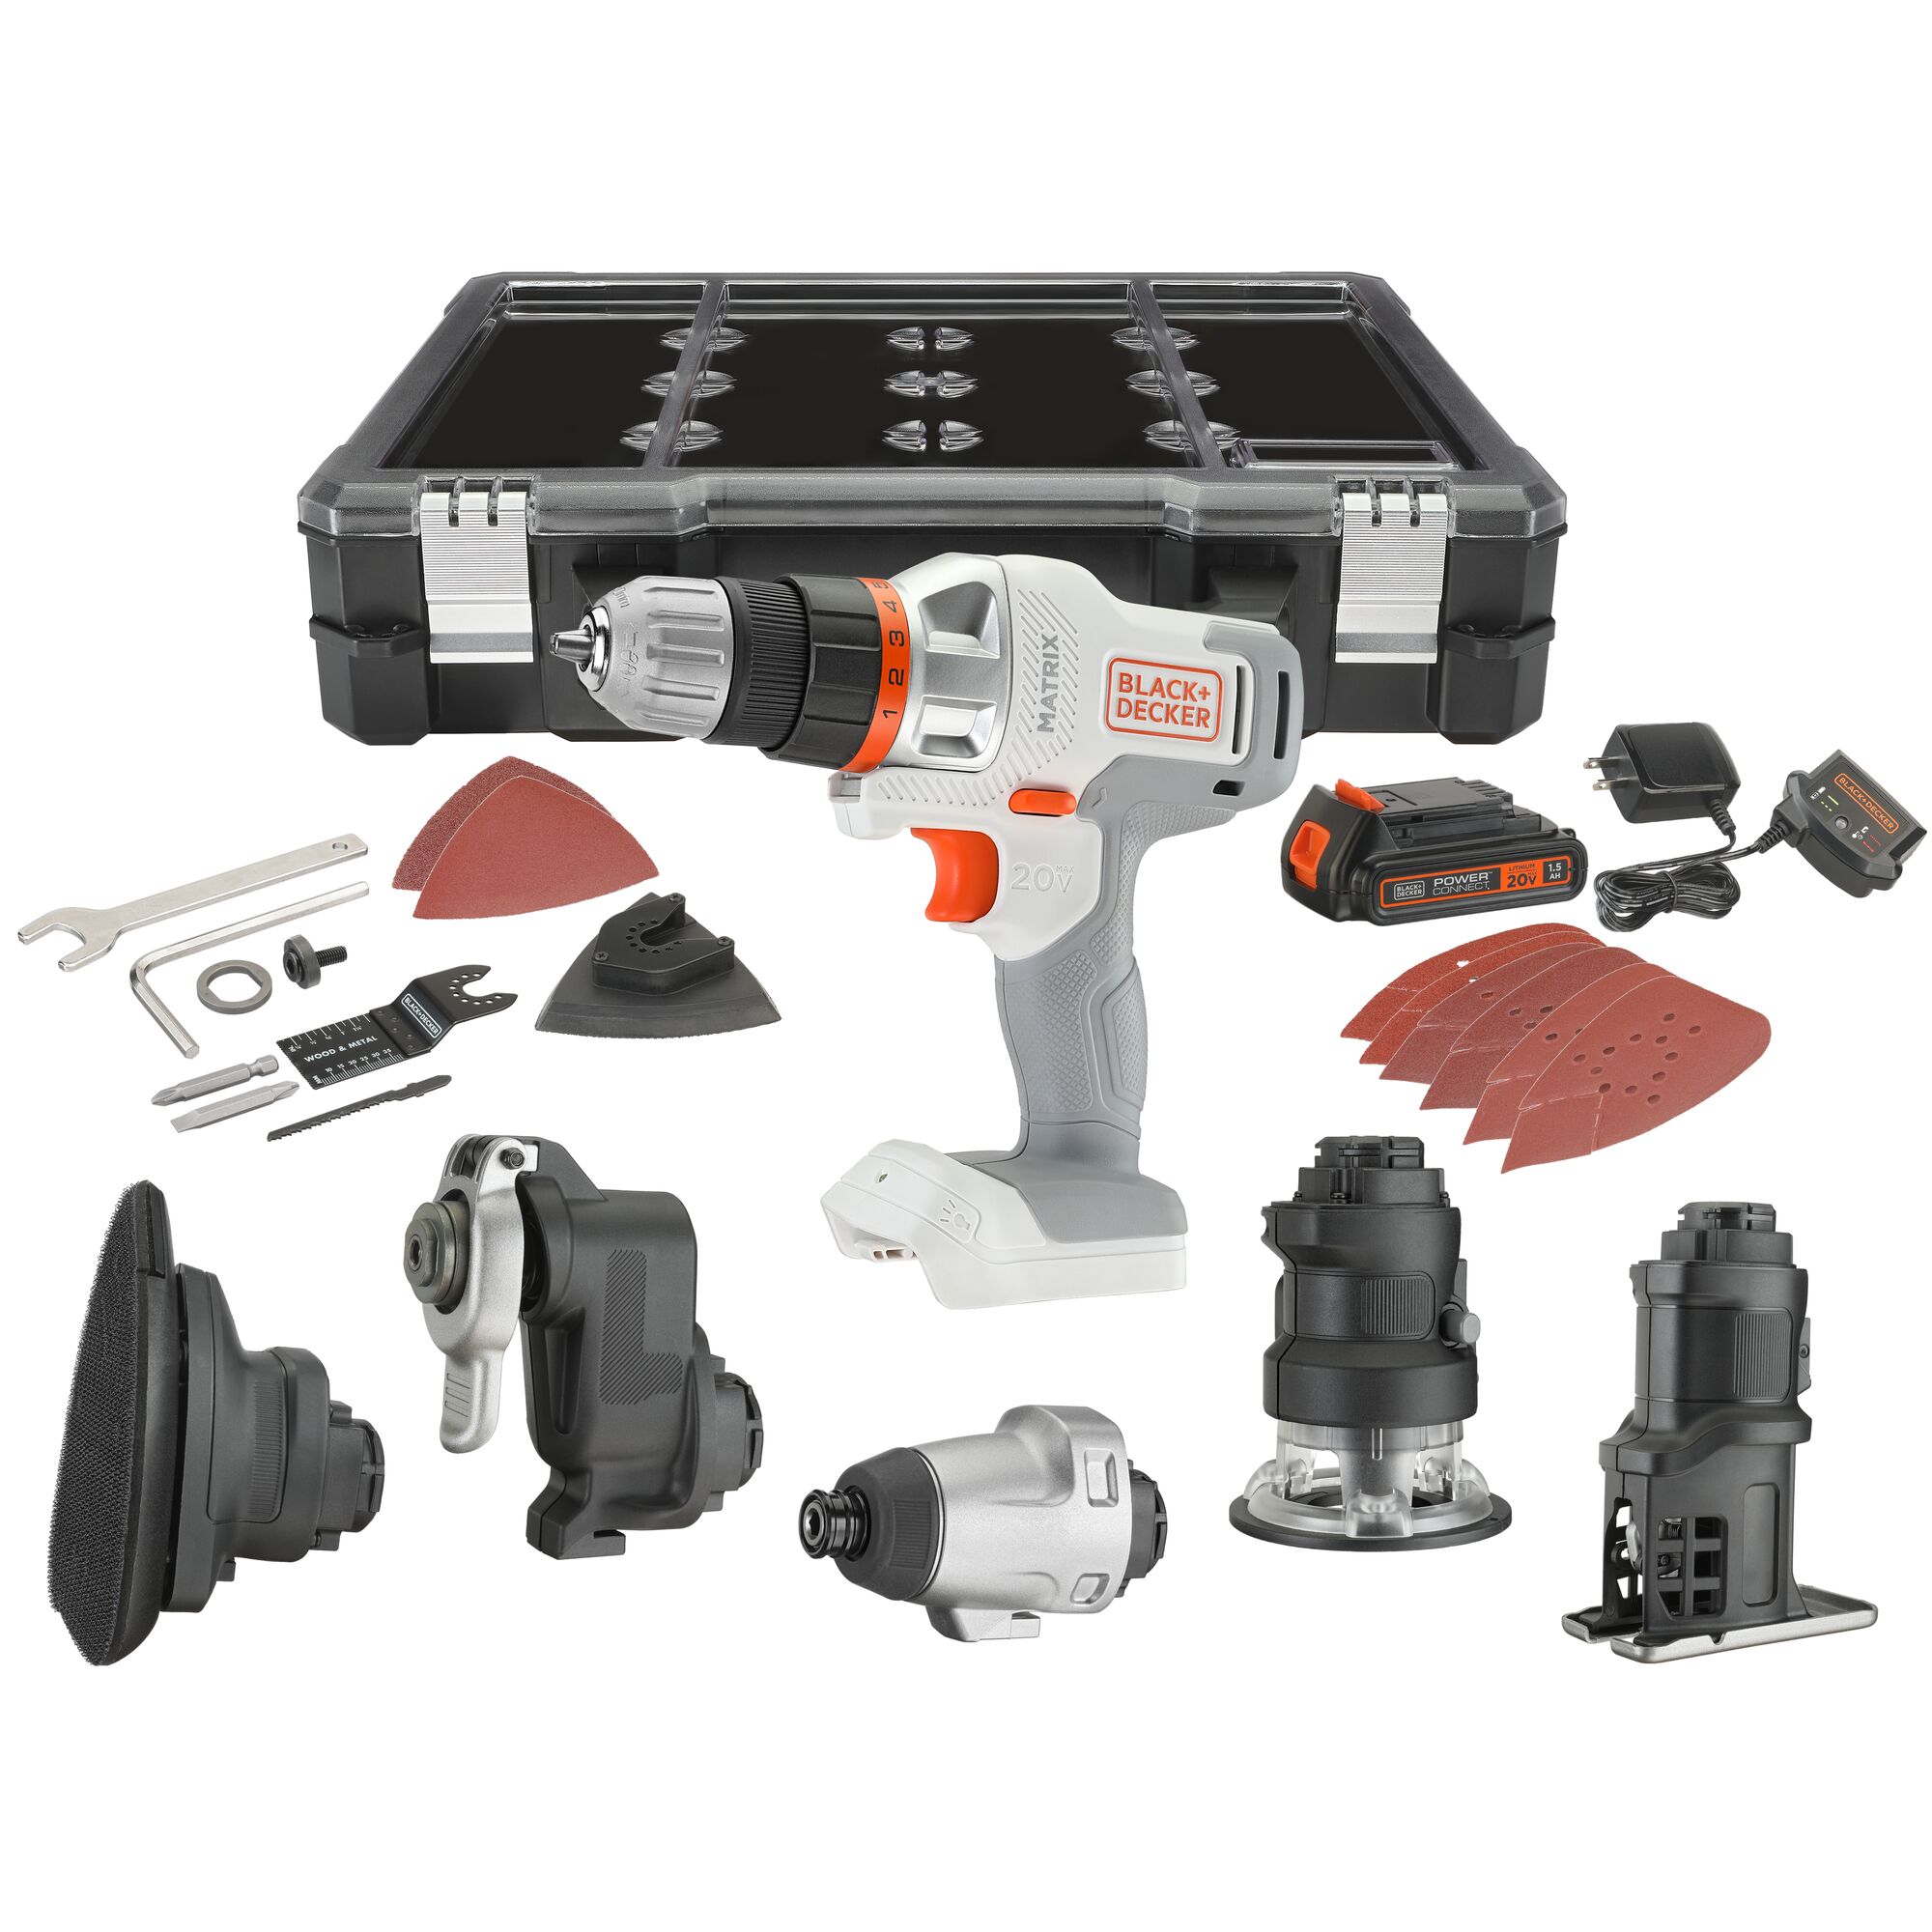 20 Volt MAX MATRIX Cordless Combo  6 Tool Kit with other accessories.